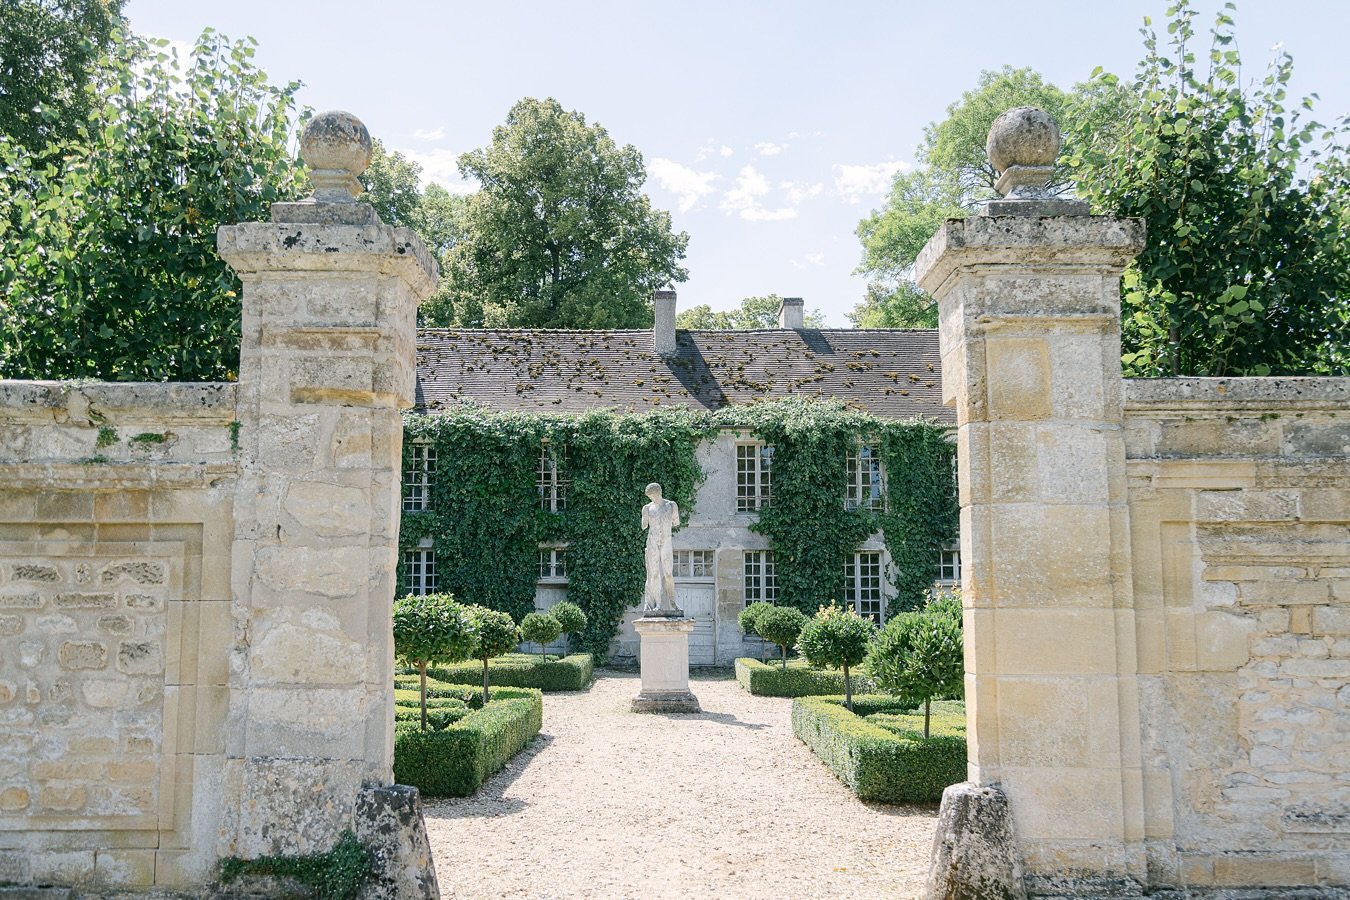 Location truly transforms an event. @chateau_de_villette proved to be the perfect setting for an enchanting cocktail reception. The charming estate complemented every detail of the celebration. 

Nestled in the heart of France, this venue brought to 